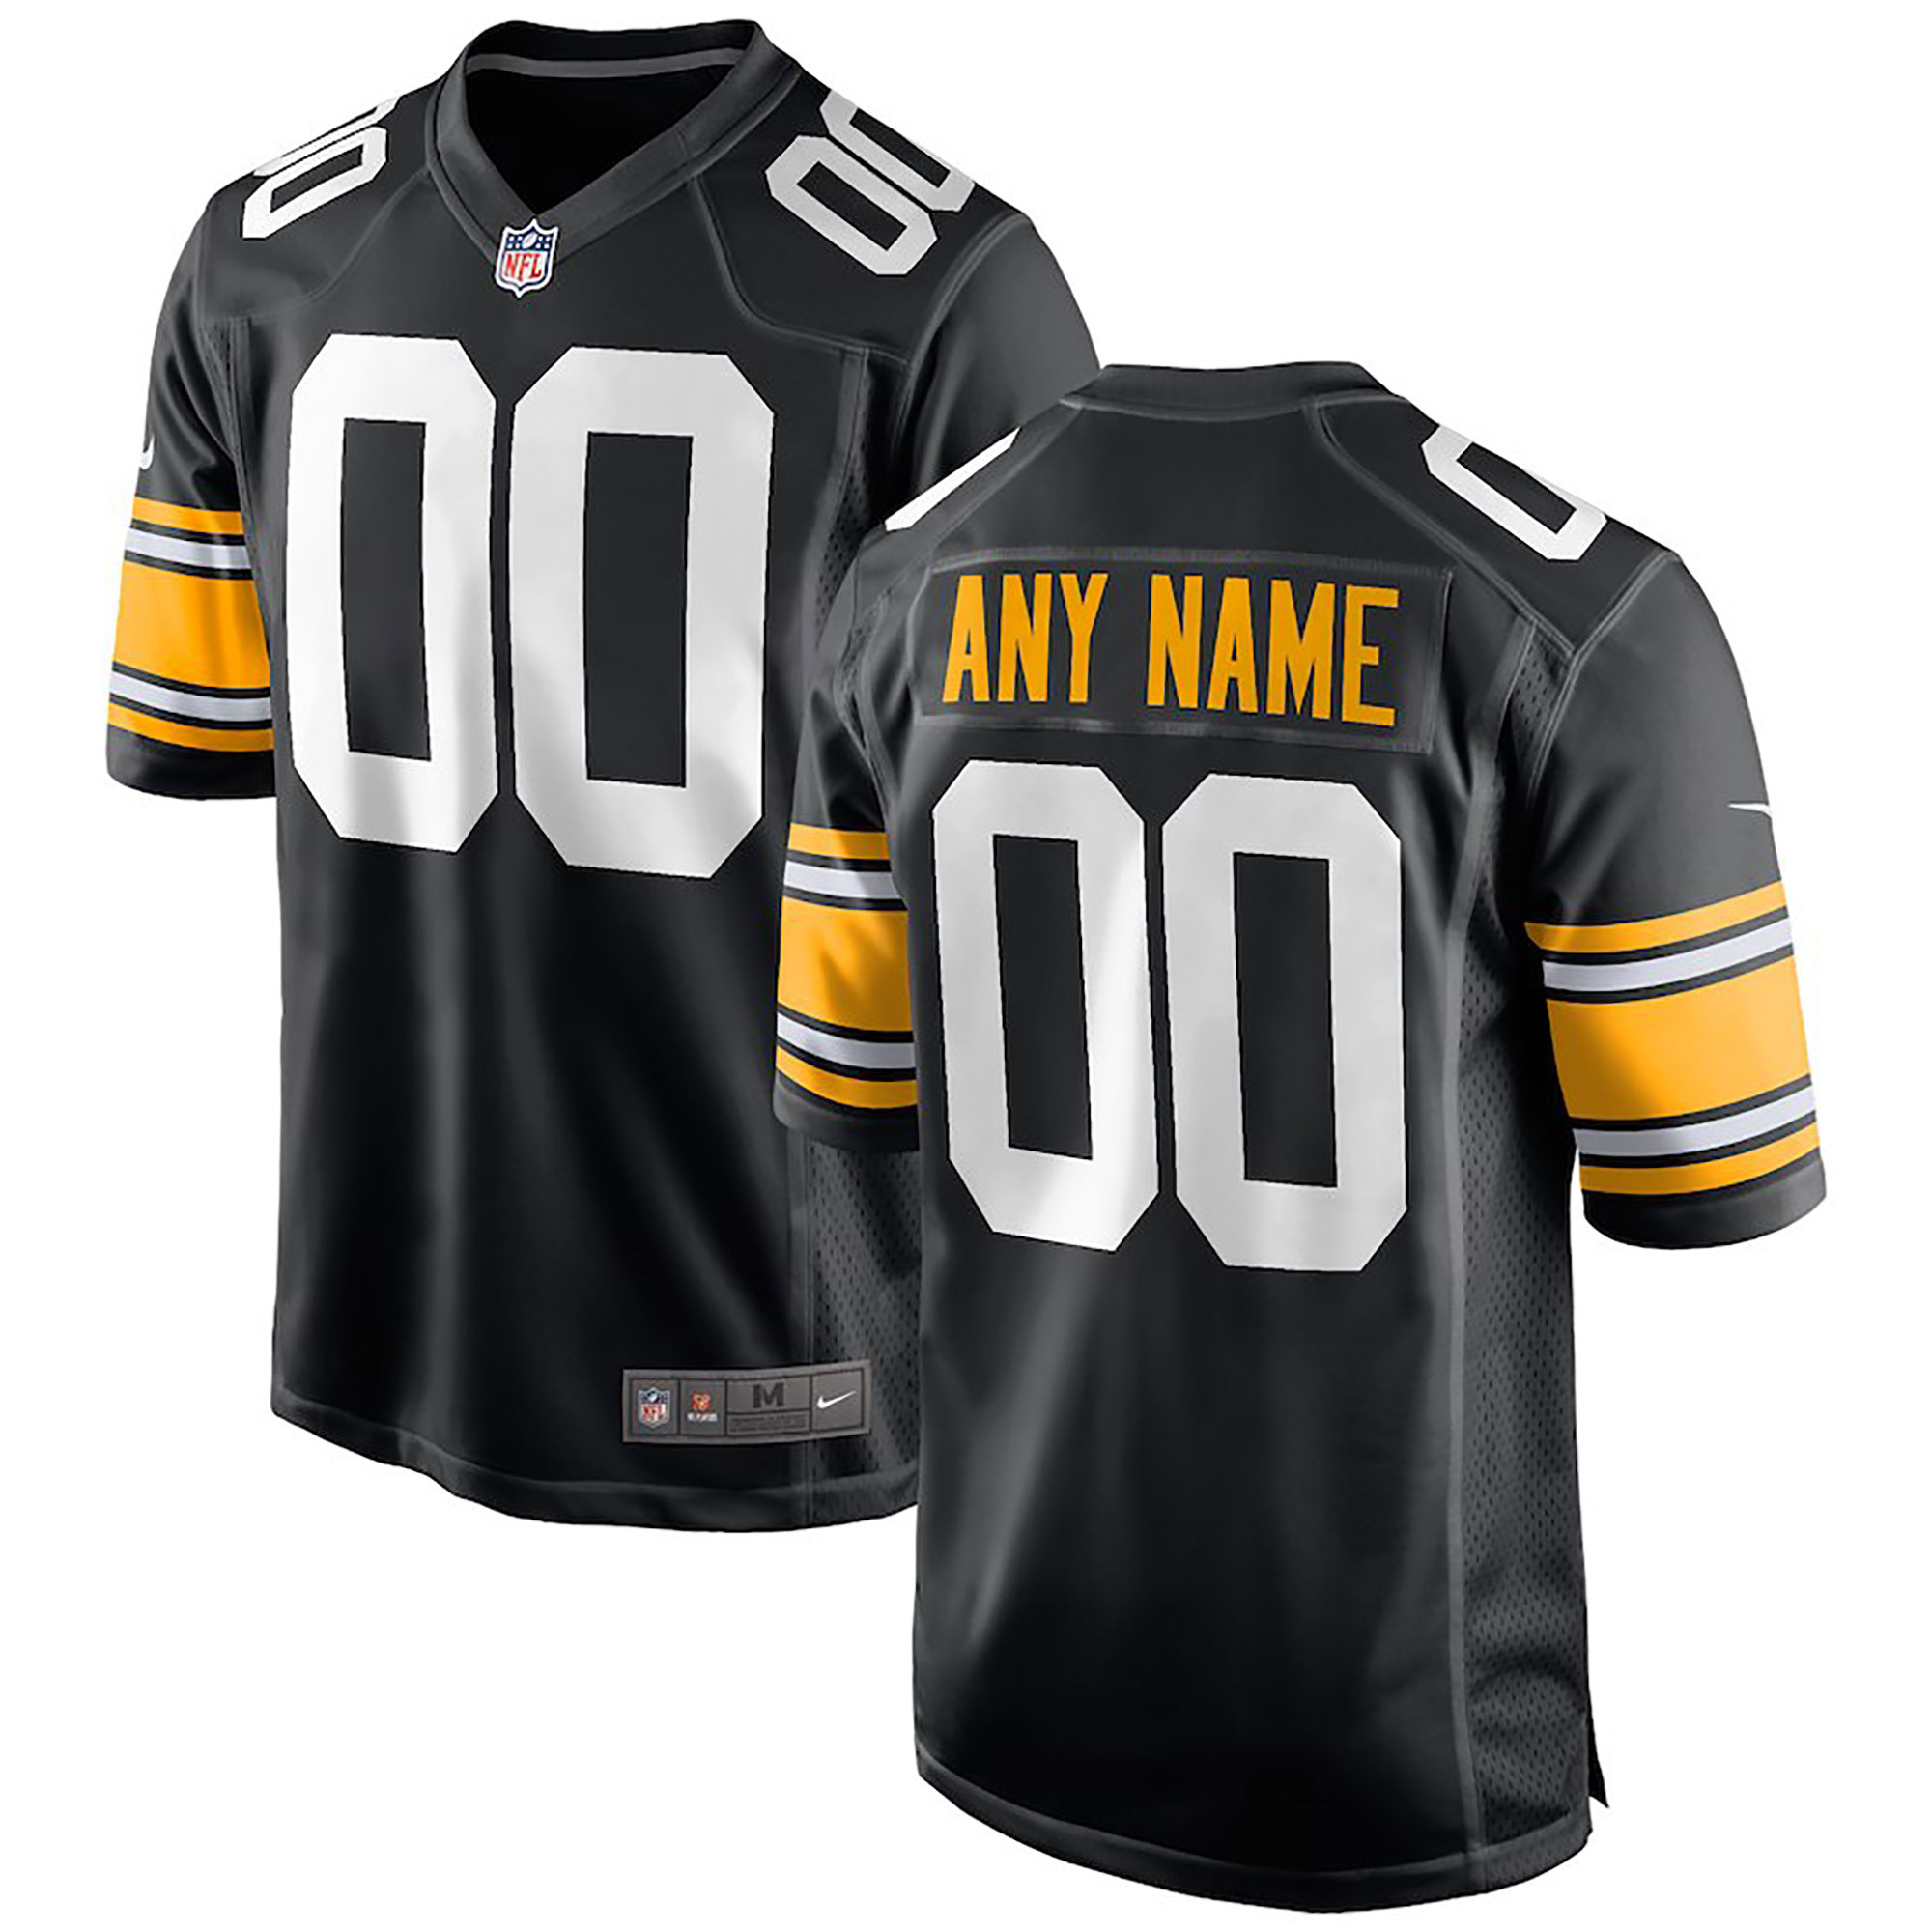 steelers classic jersey